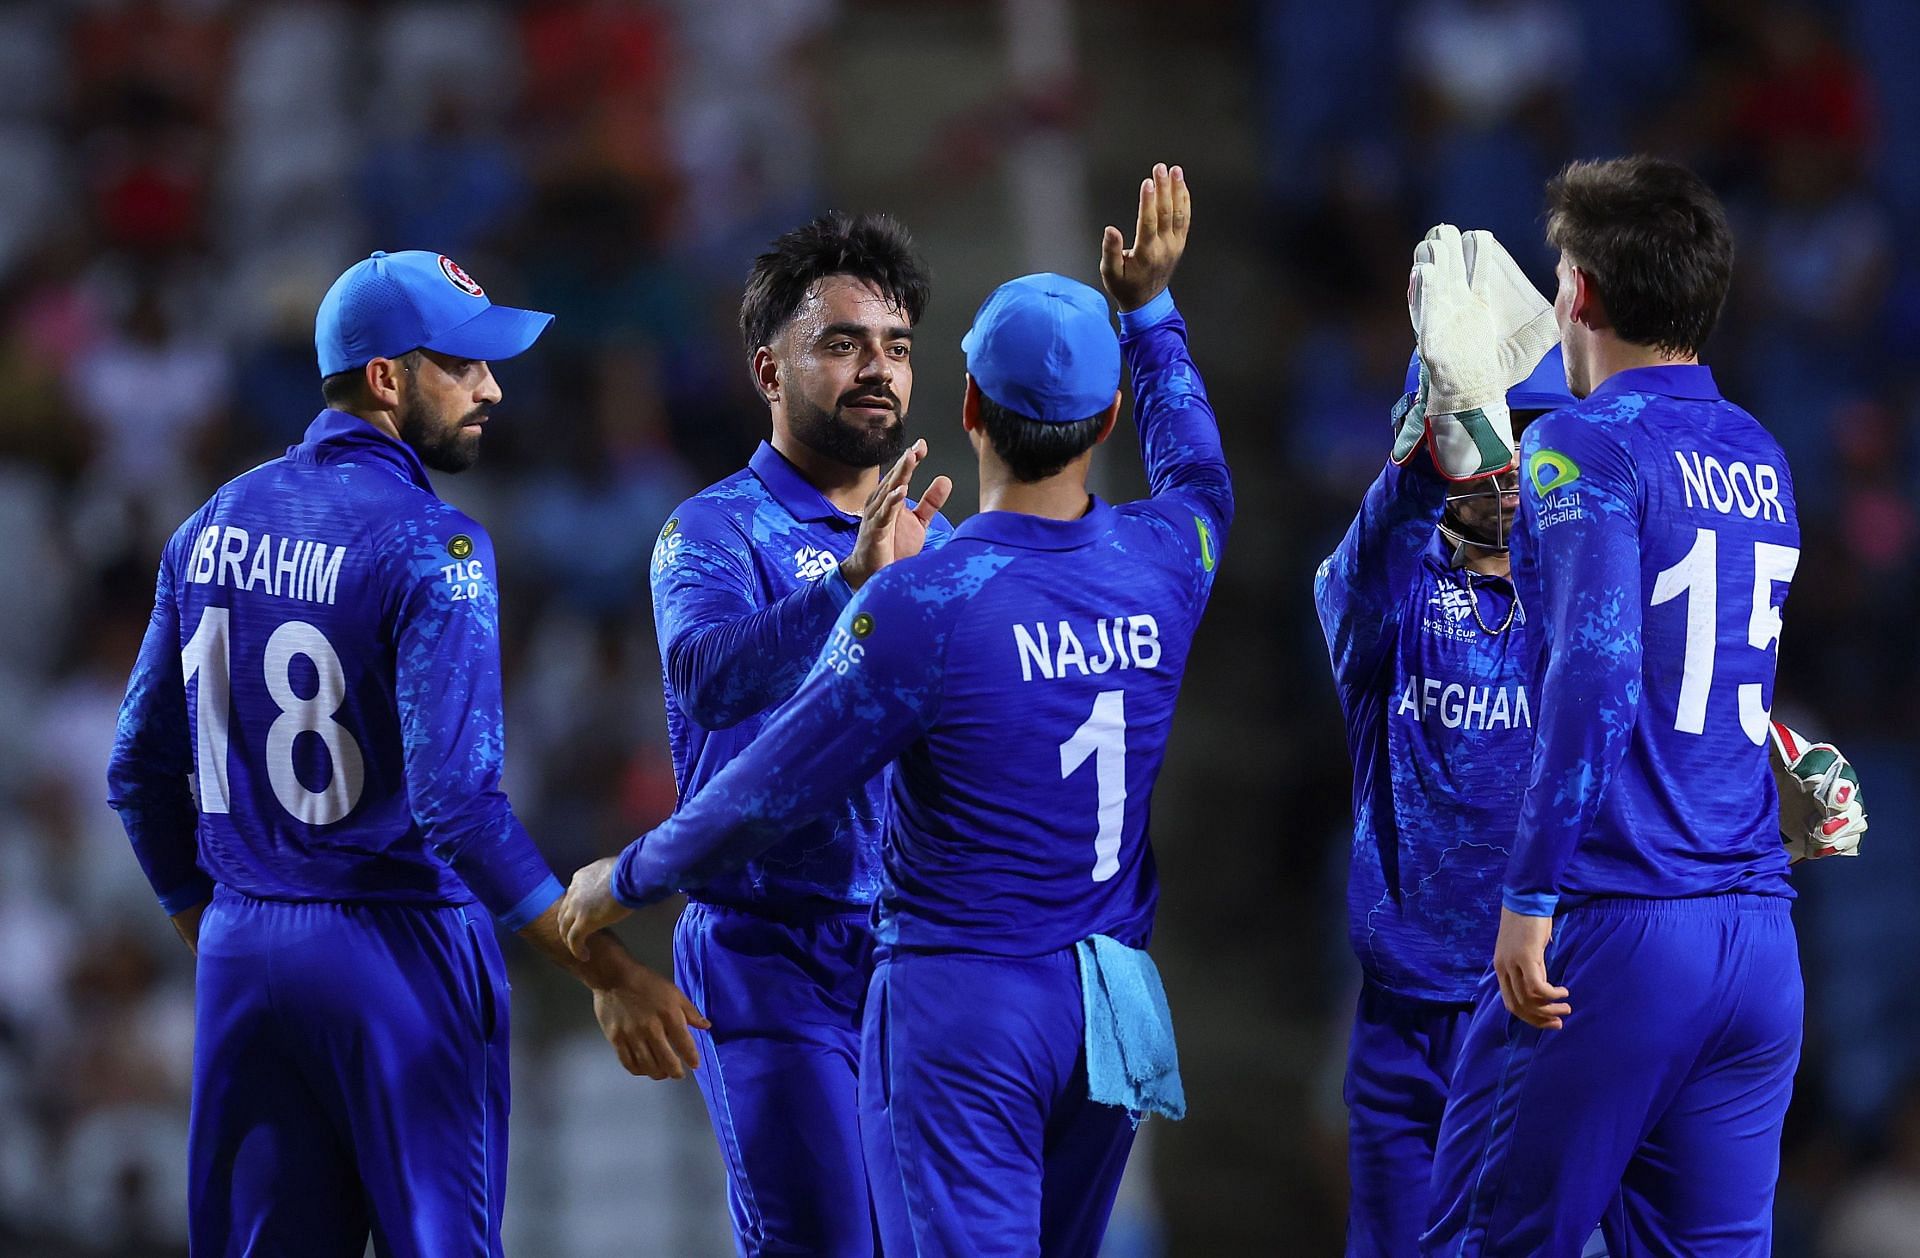 5 players who played a massive role in Afghanistan’s phenomenal rise in world cricket ft. Rashid Khan